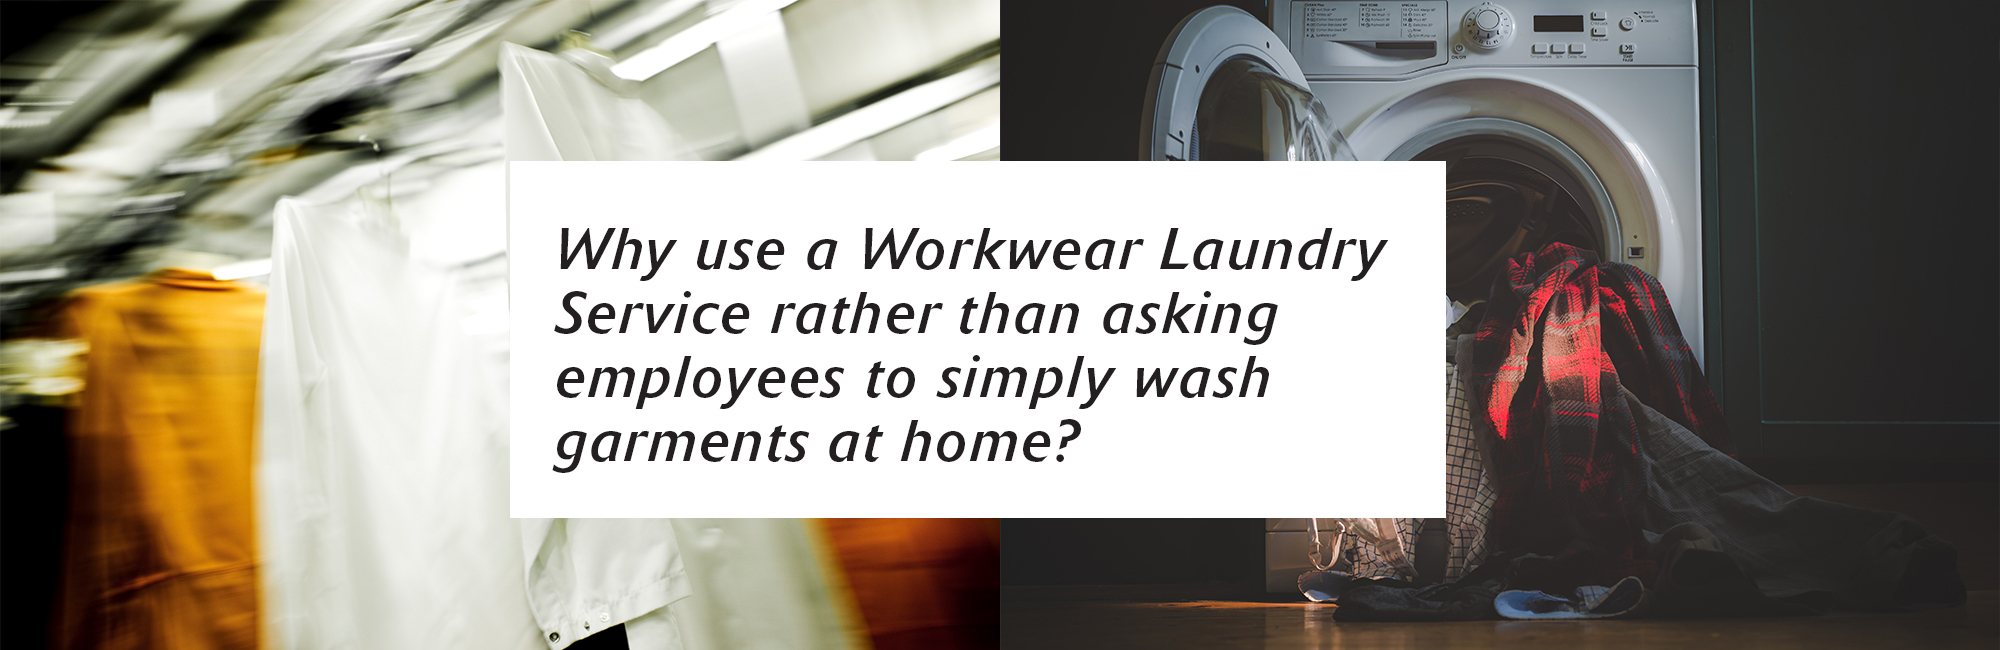 Why use a laundry service rather than simply washing garments at home? - News - CLEAN Services